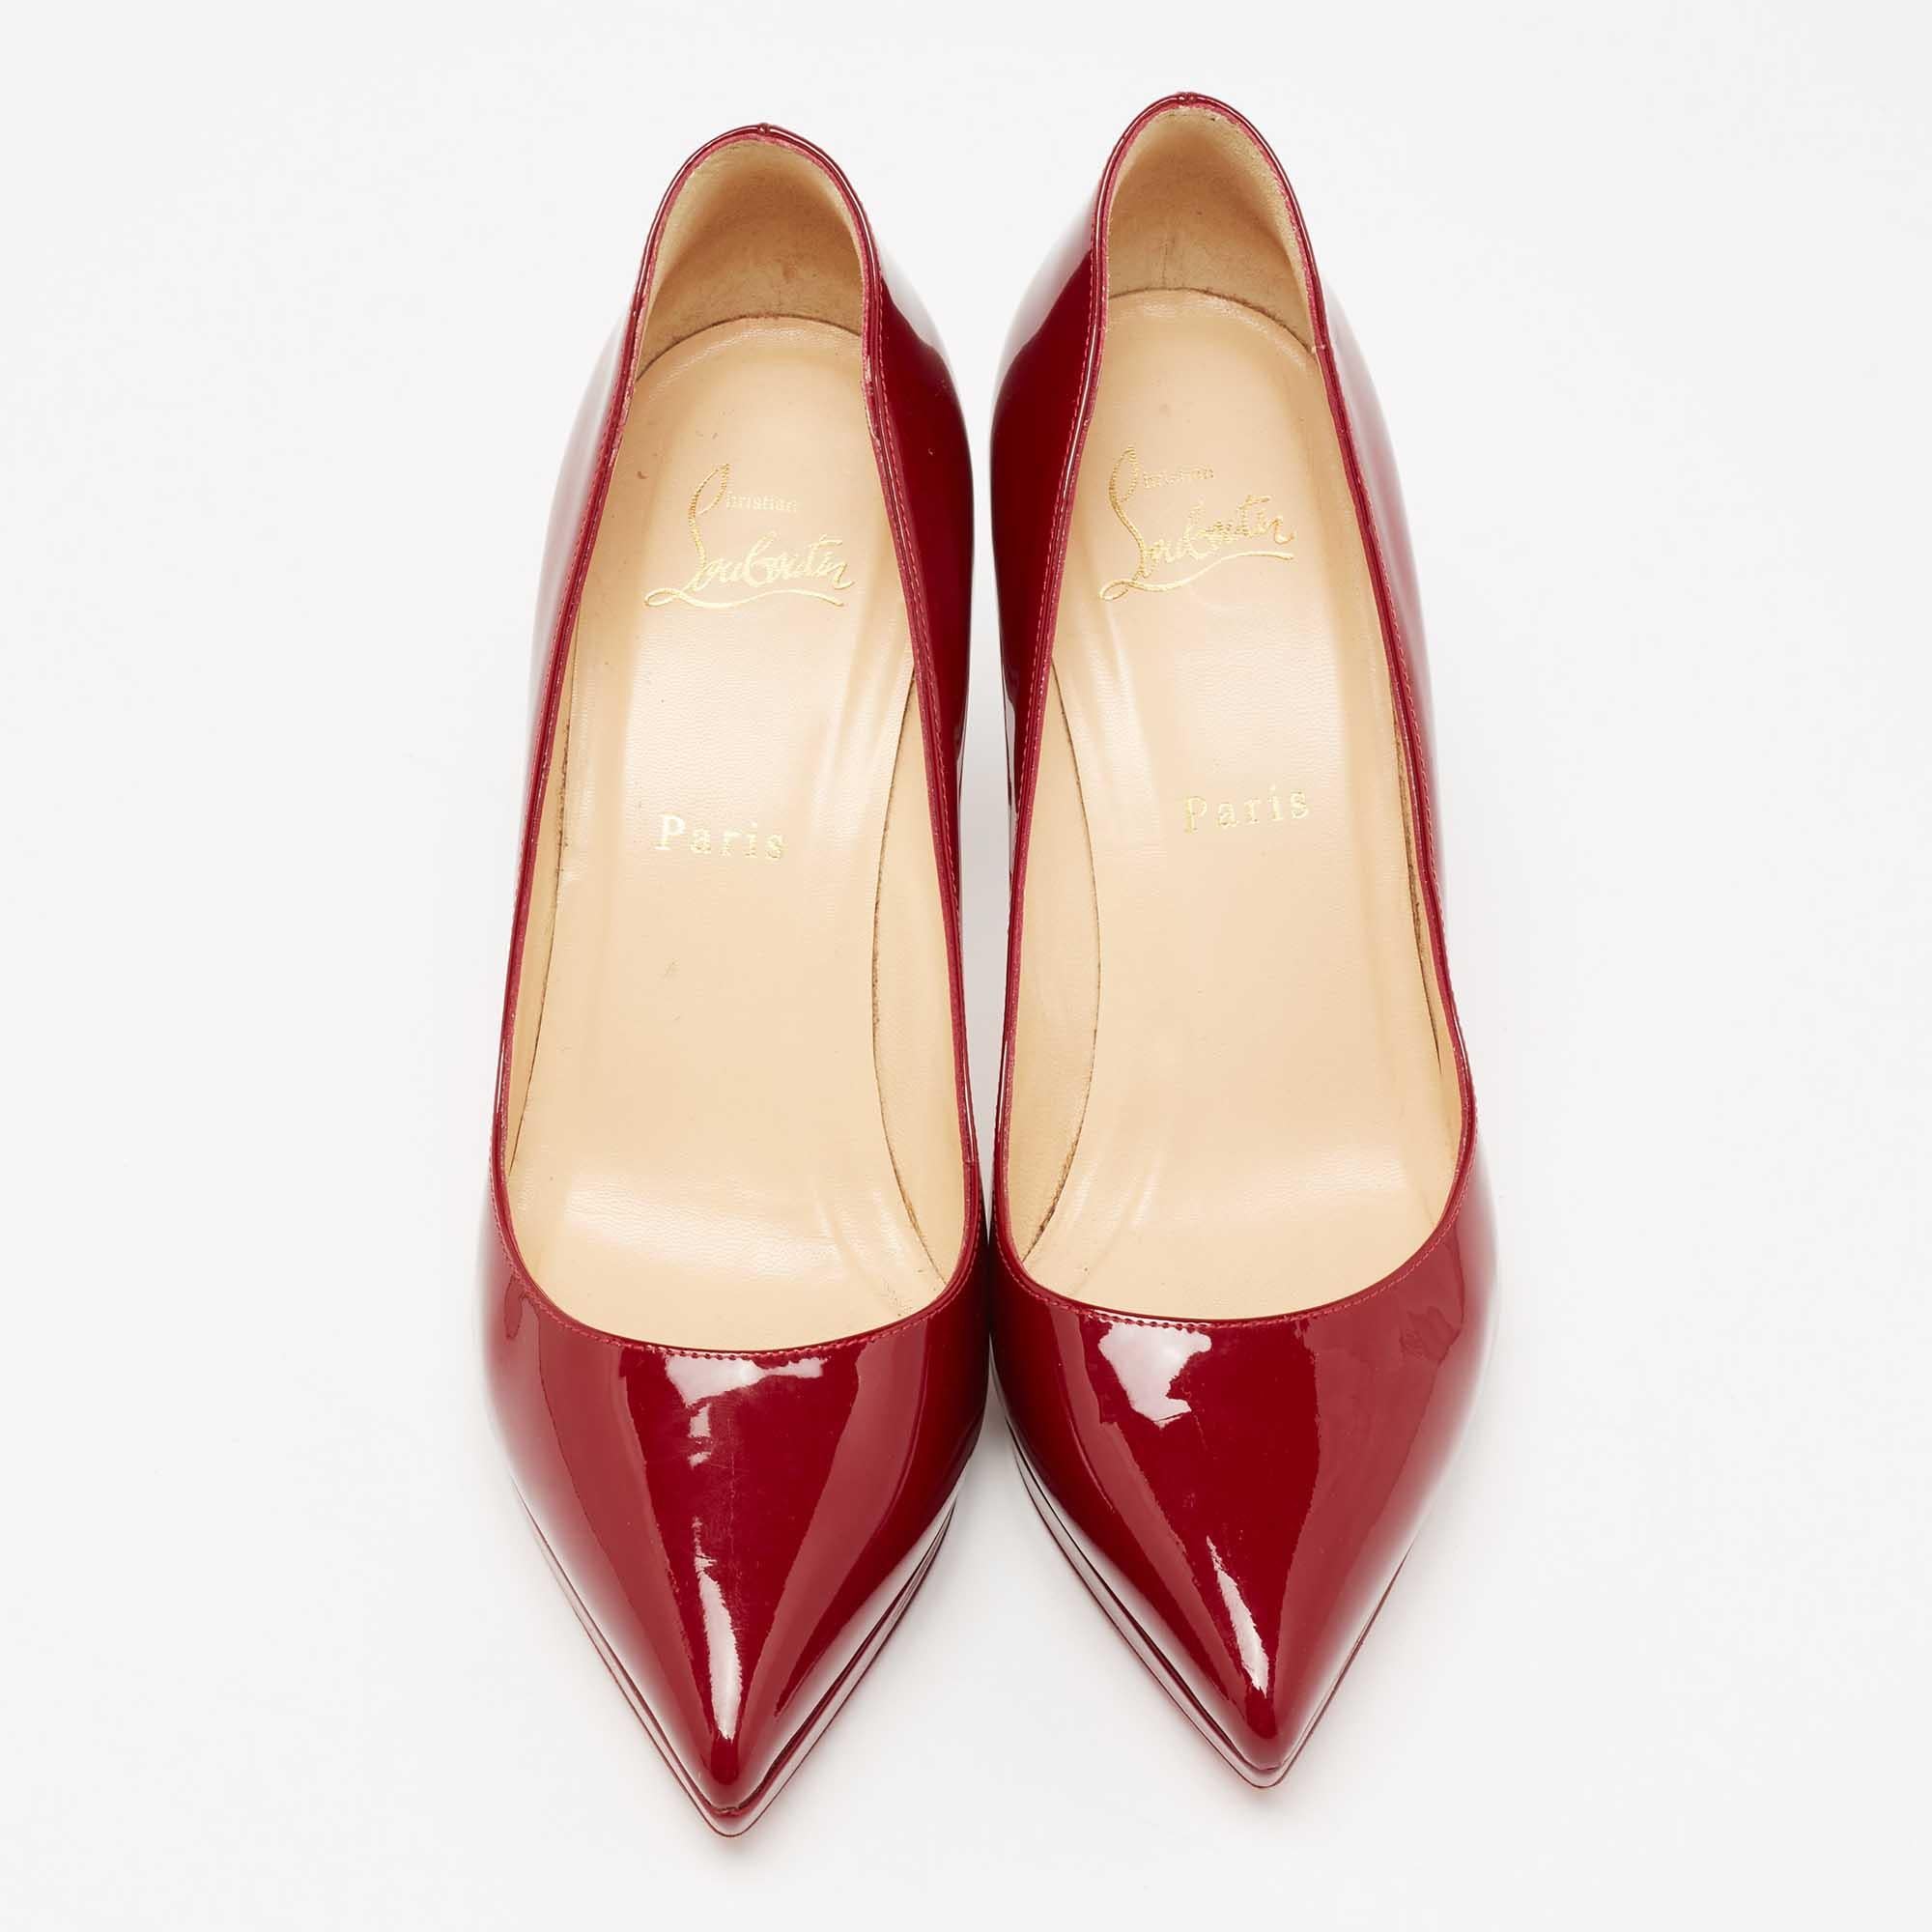 Christian Louboutin Burgundy Patent Leather Pigalle Plato Pumps Size 39 4